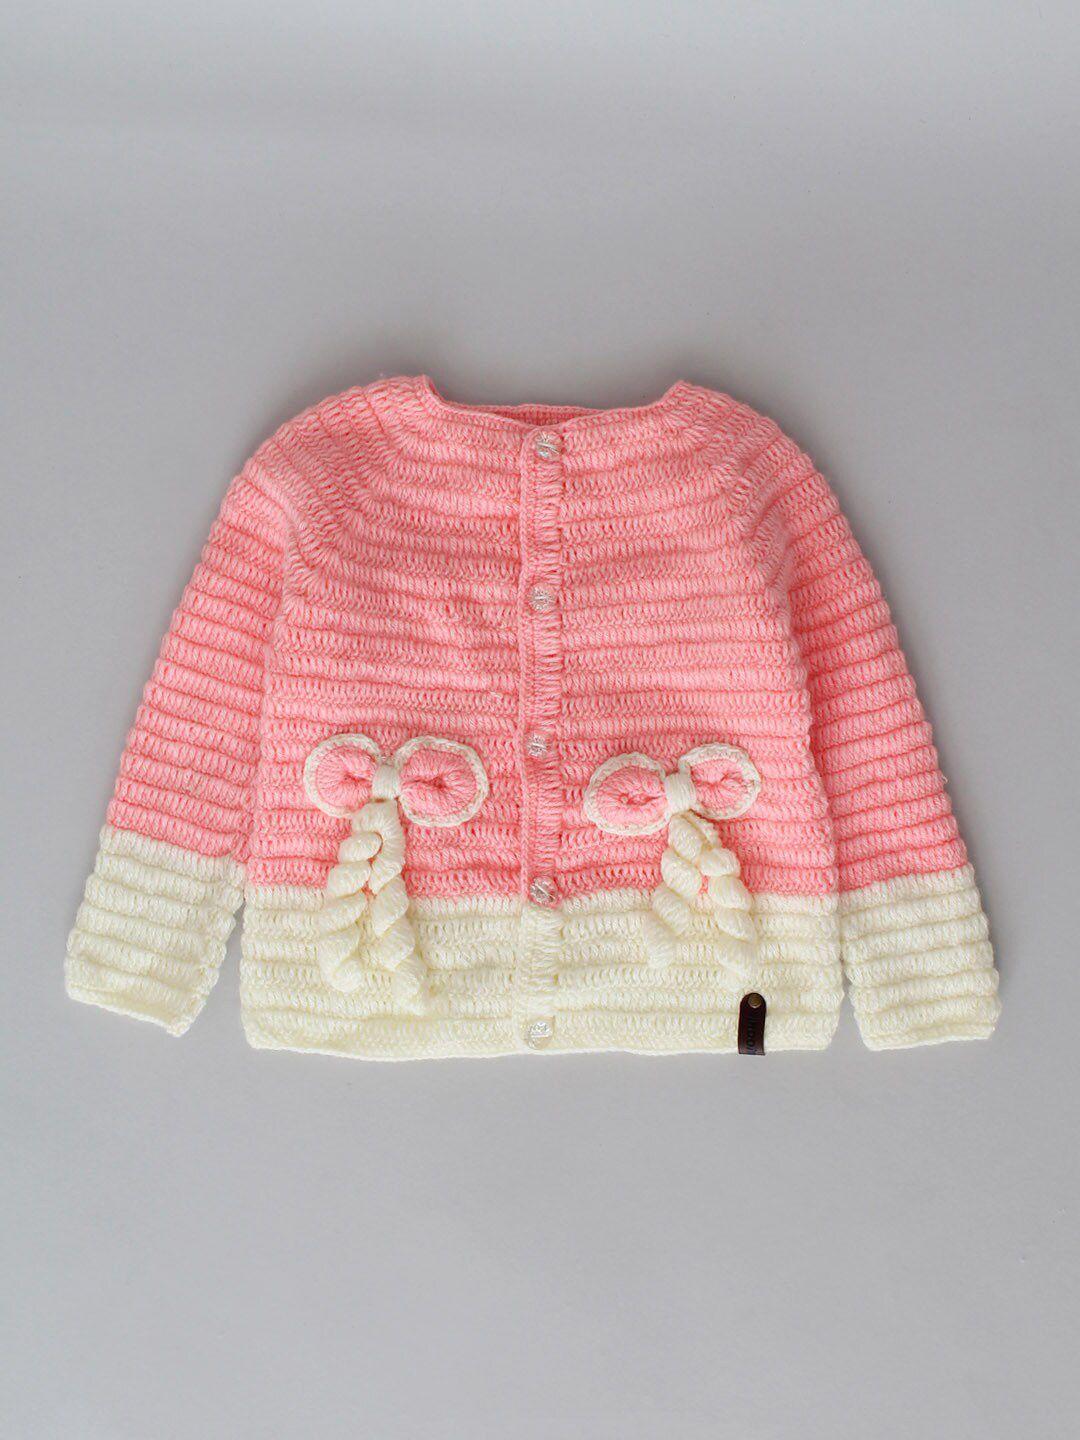 woonie kids embroidered acrylic cardigan